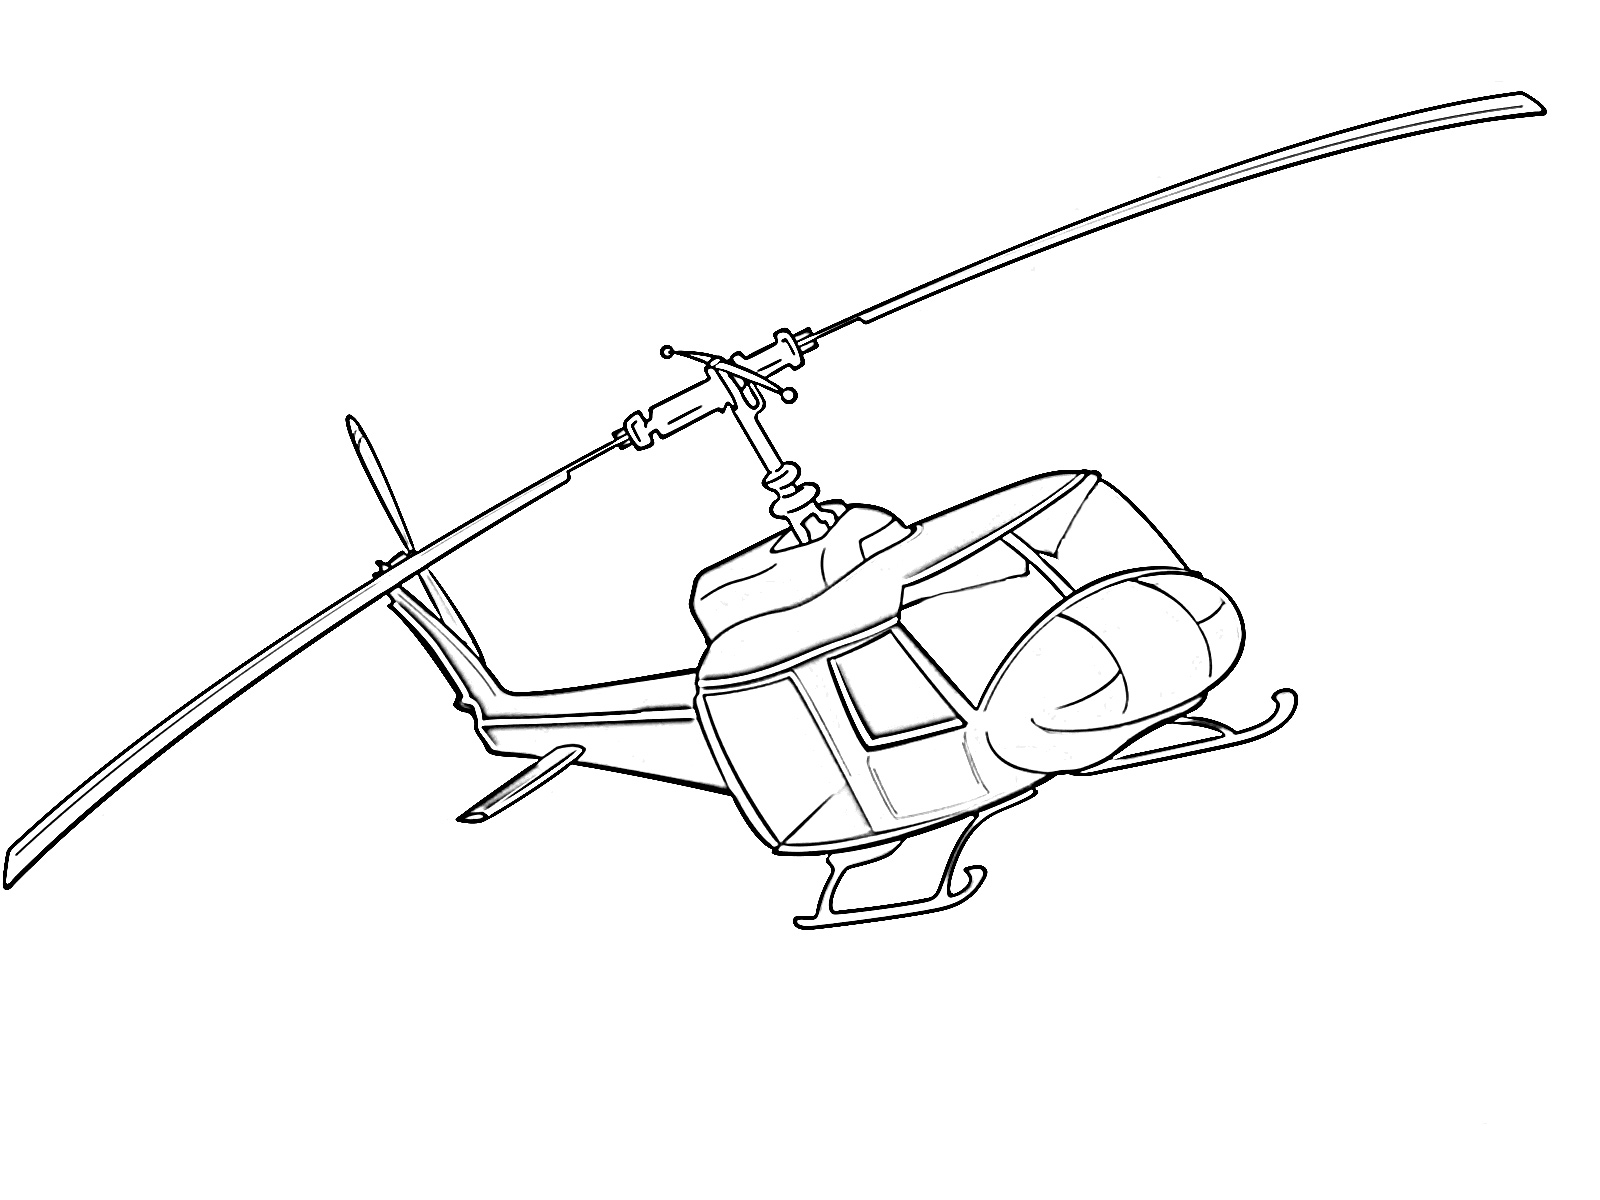 20 Free Helicopter Coloring Pages for Kids   Save, Print, & Enjoy